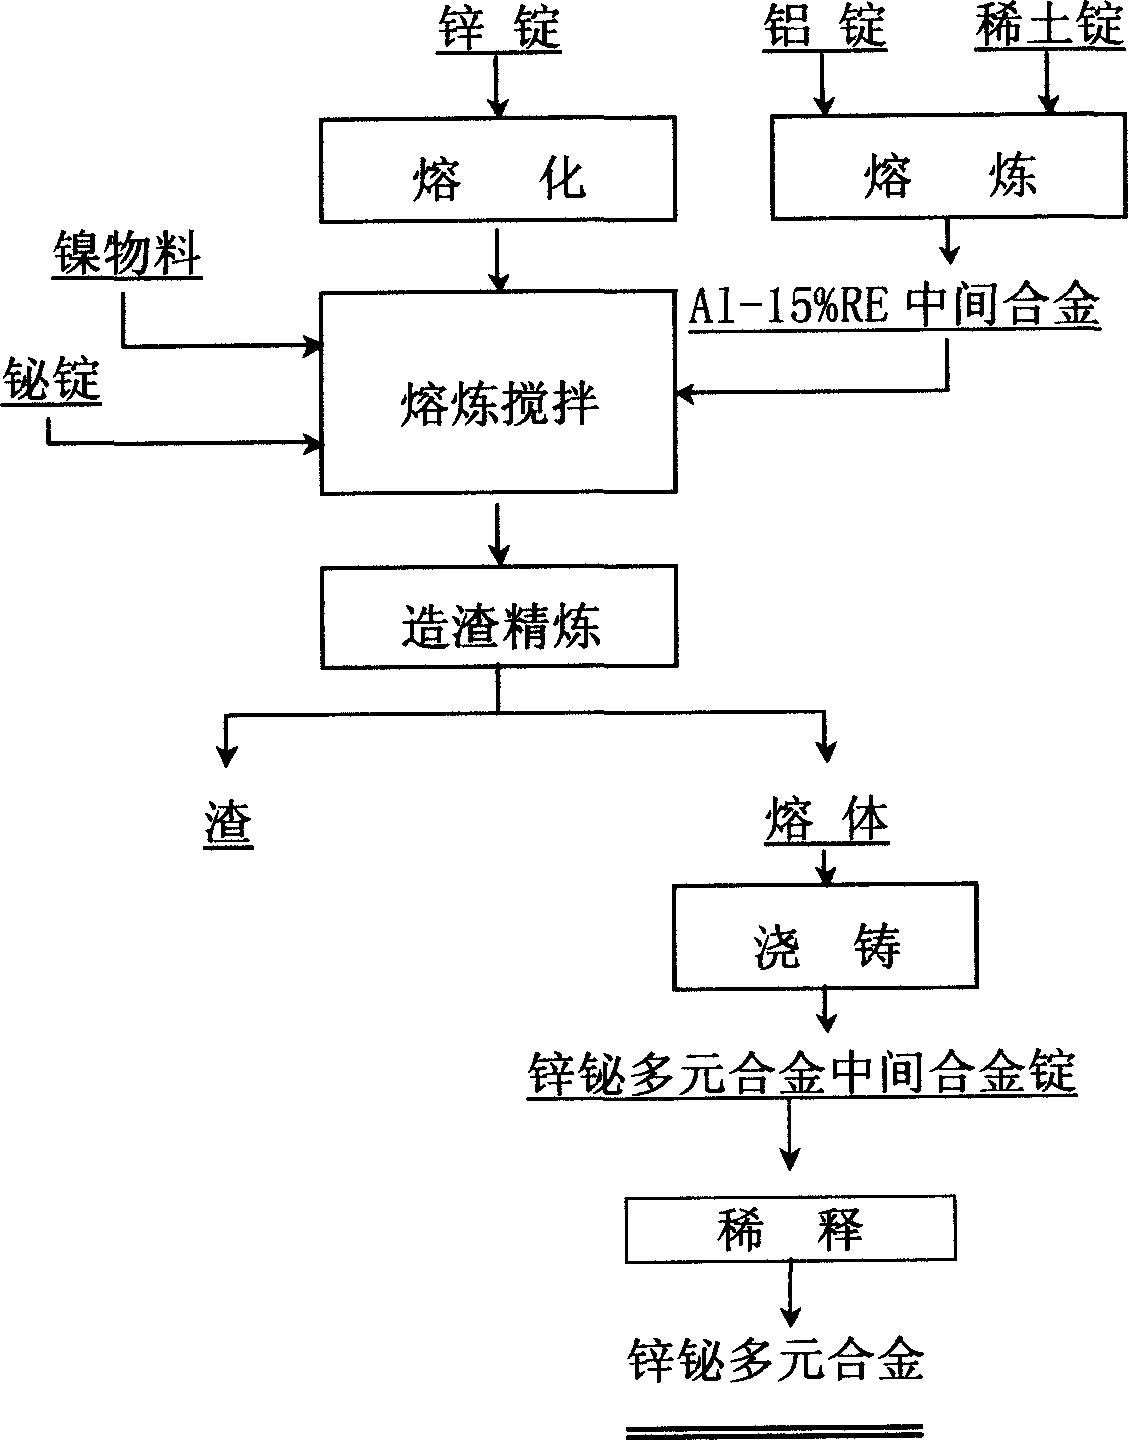 Method for producing zinc bismuth multicomponent alloy used for hot dip galvanizing of steel and iron members